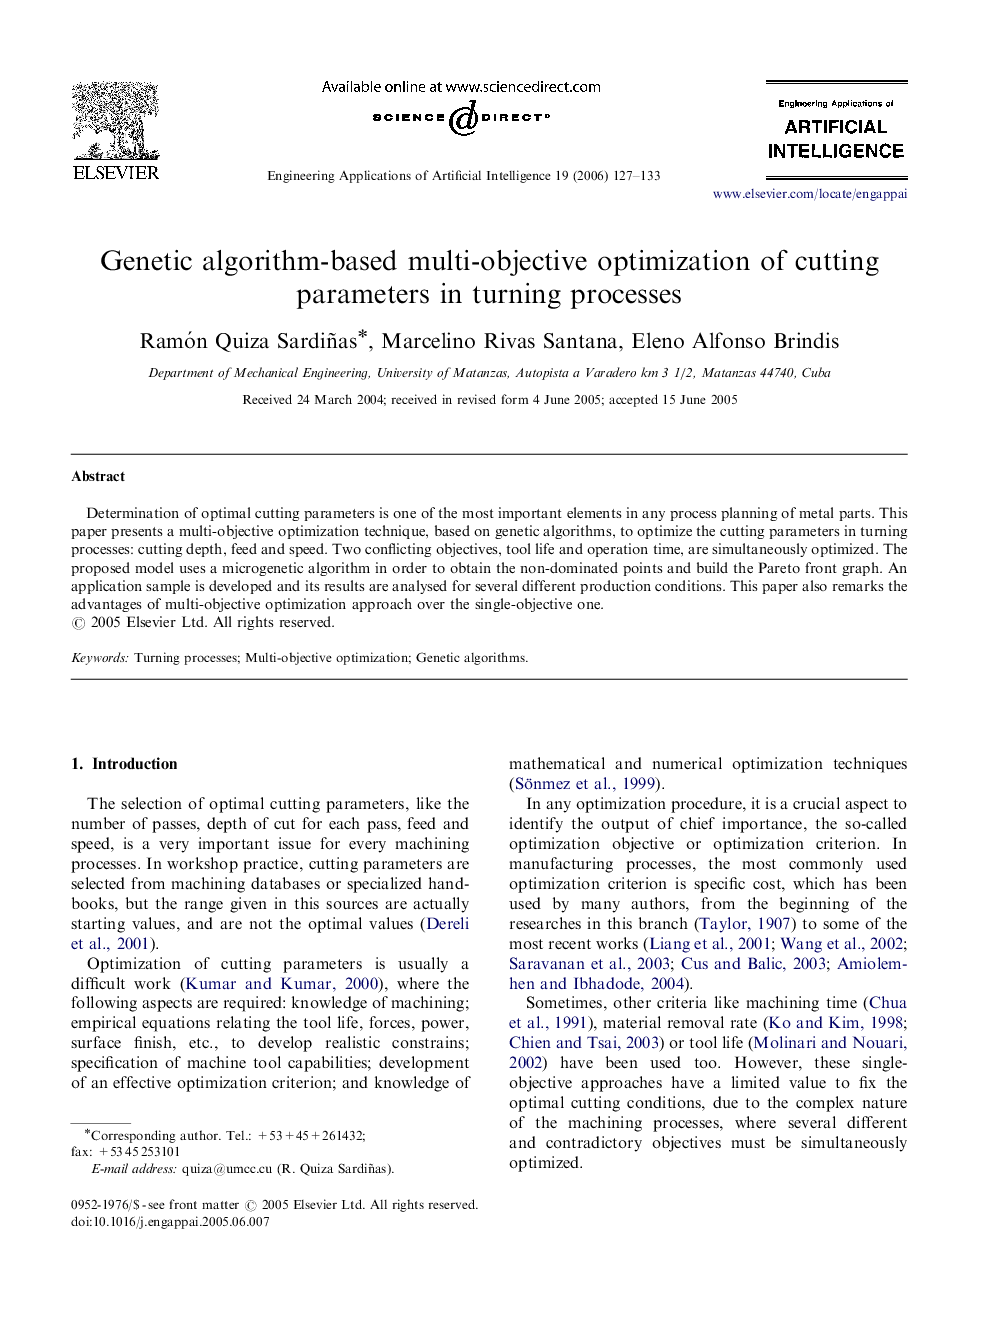 Genetic algorithm-based multi-objective optimization of cutting parameters in turning processes